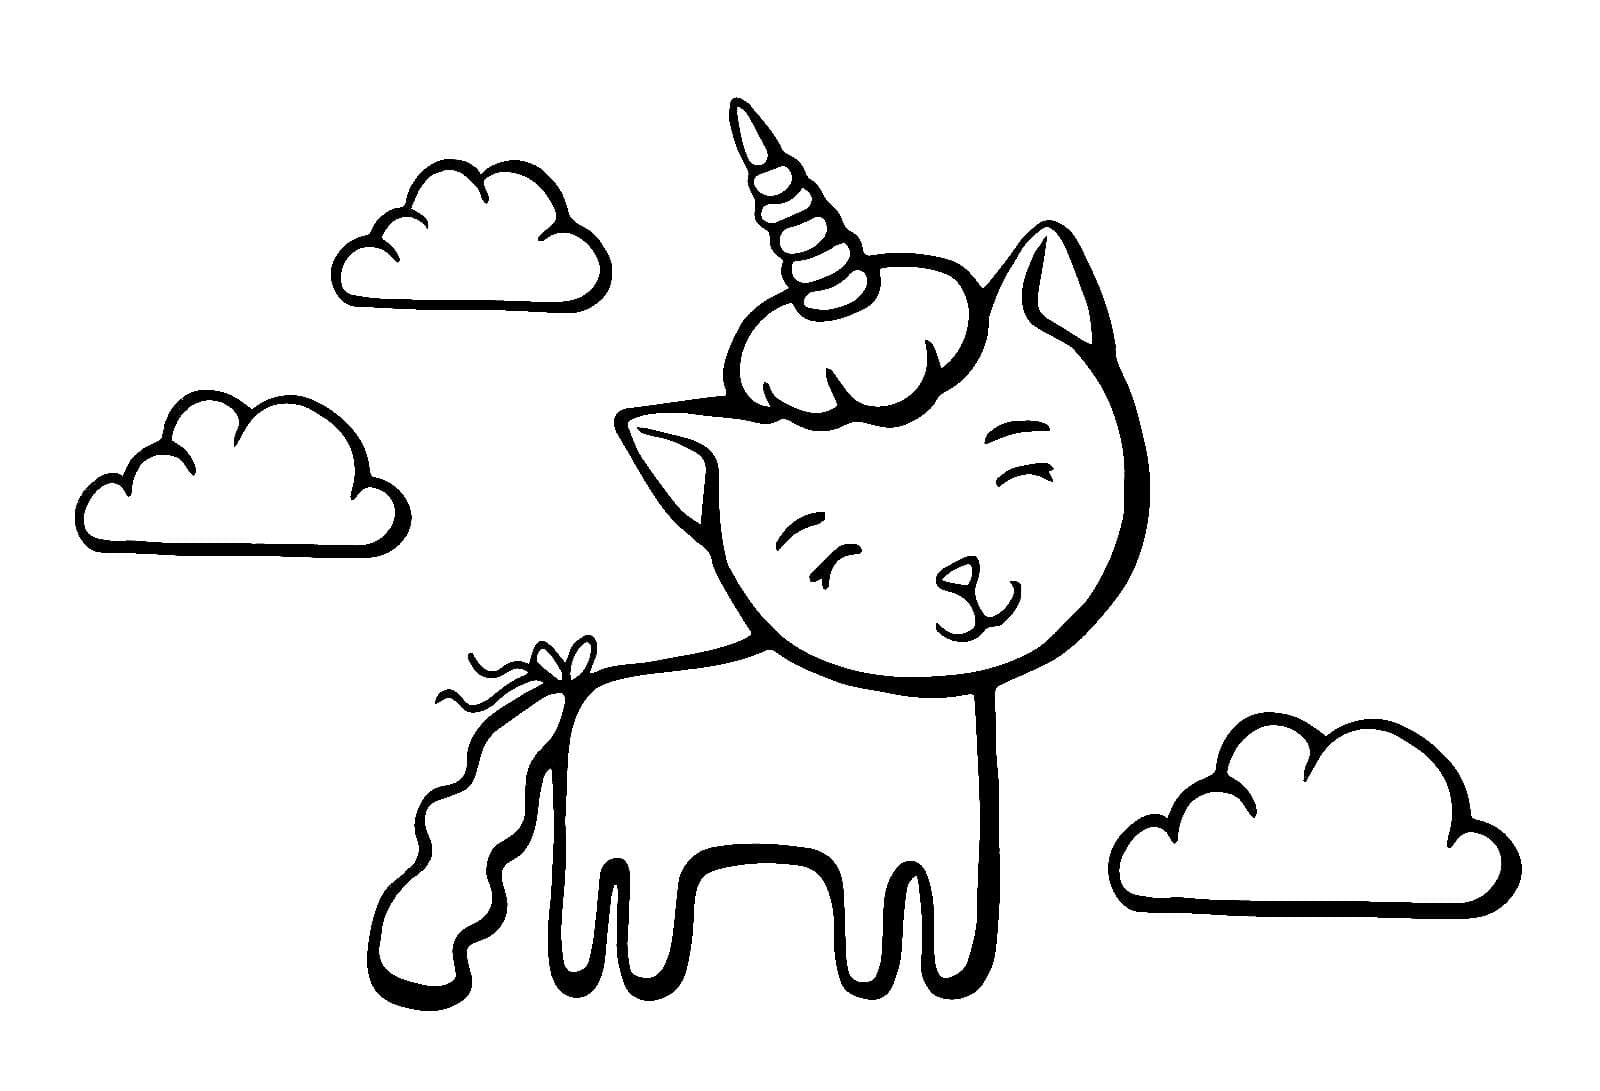 Coloring page Unicorn Cat among the clouds